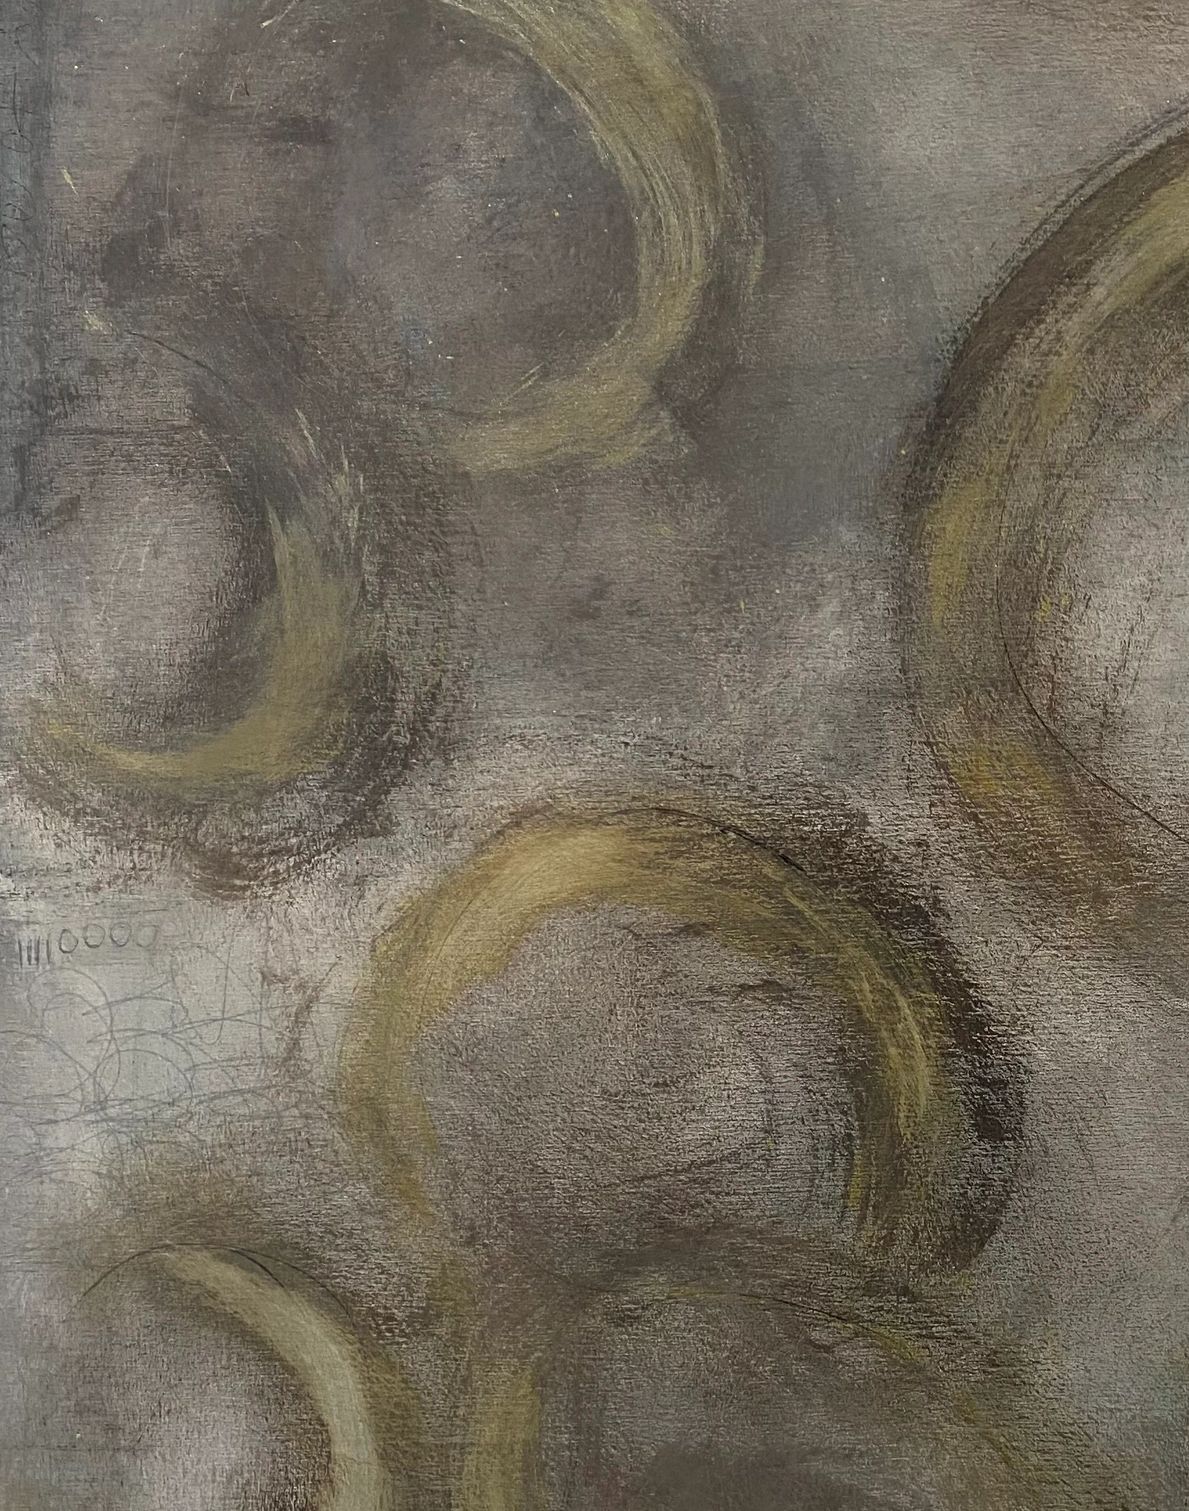 Circles of Love, Deana Markus, abstract art, abstract in greys and gold, peaceful, zen, modern art